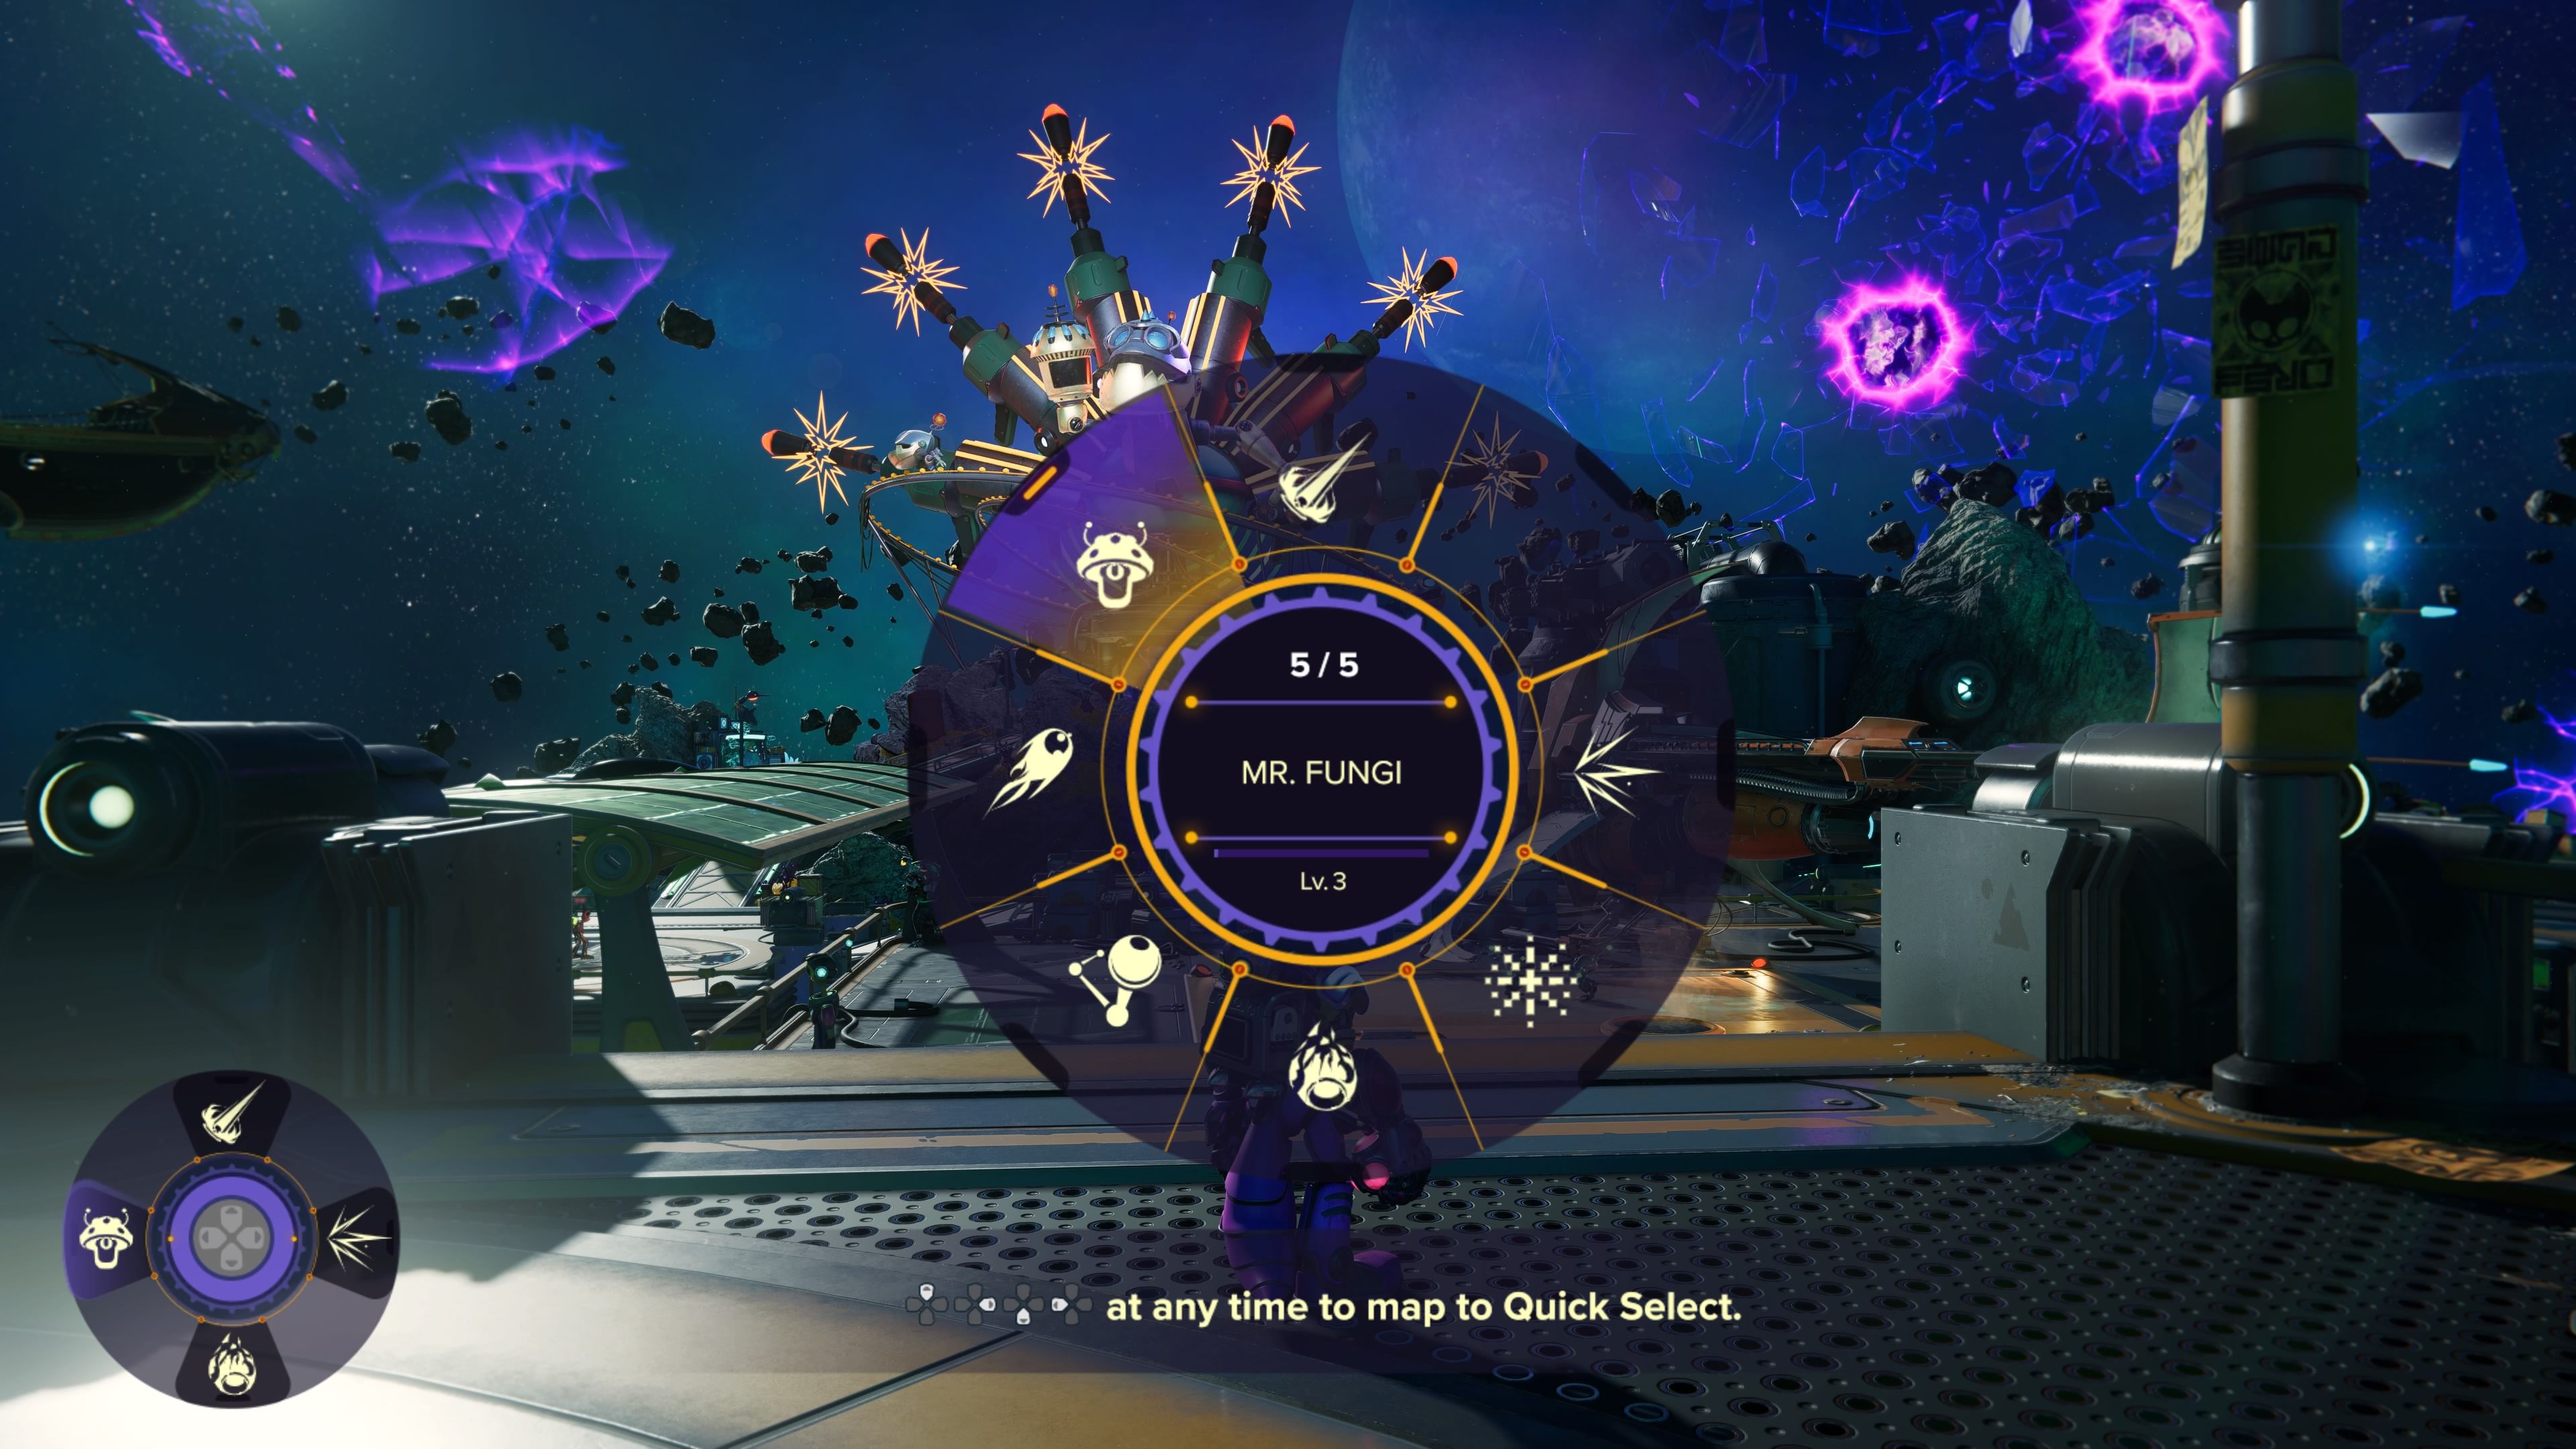 The Quick Select menu in Ratchet & Clank: Rift Apart